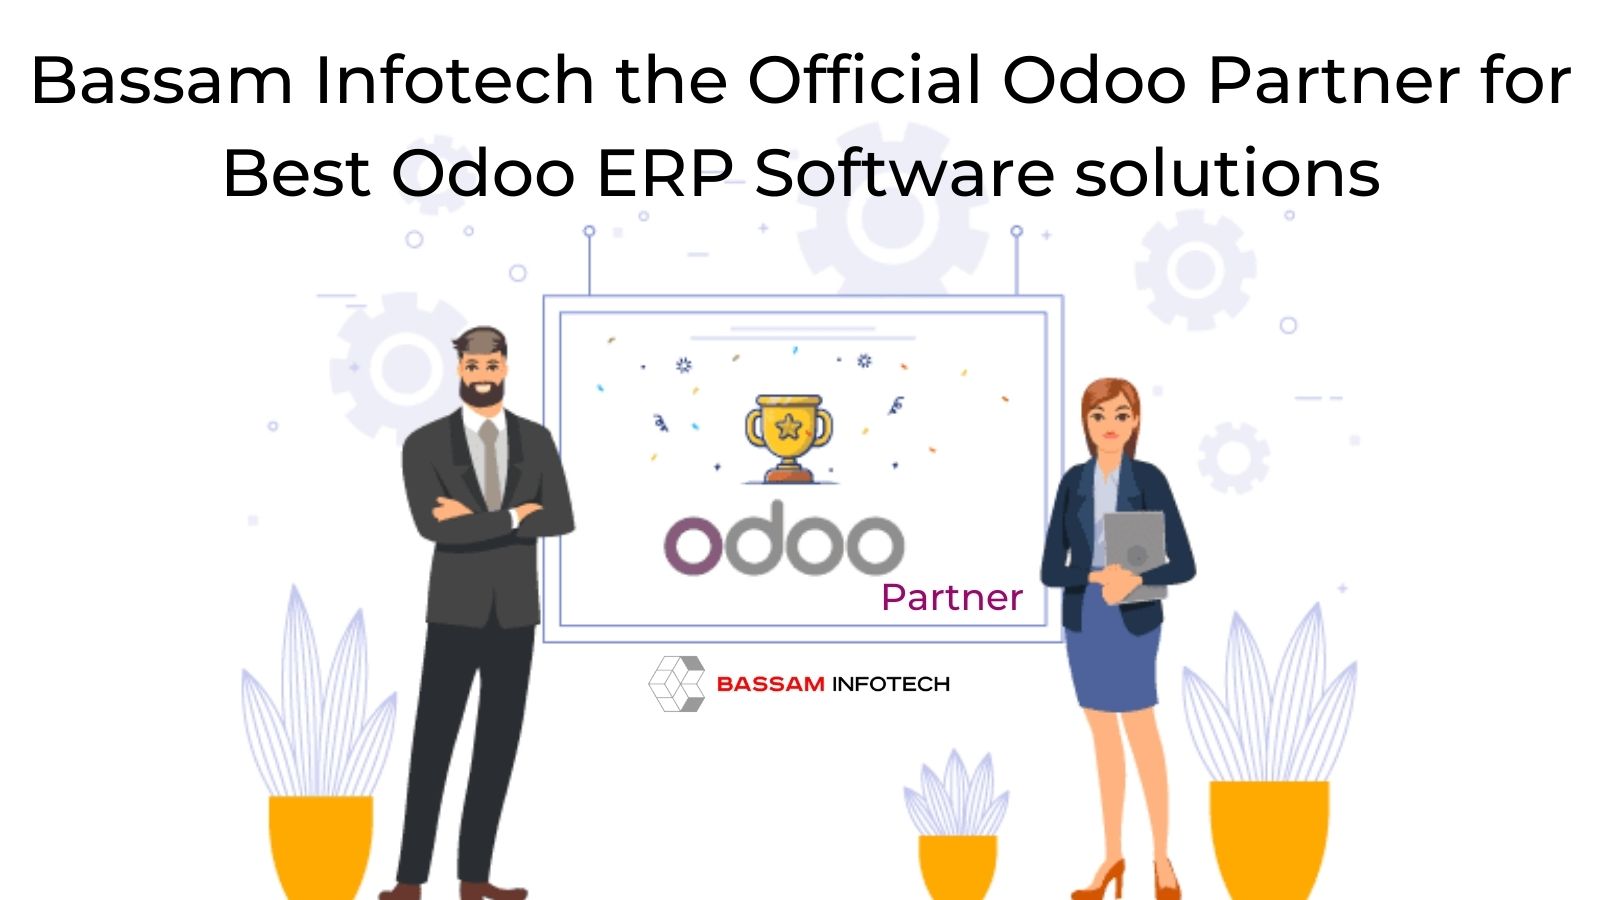 Bassam Infotech the Leading ERP Software Solutions provider | Official Odoo Partner